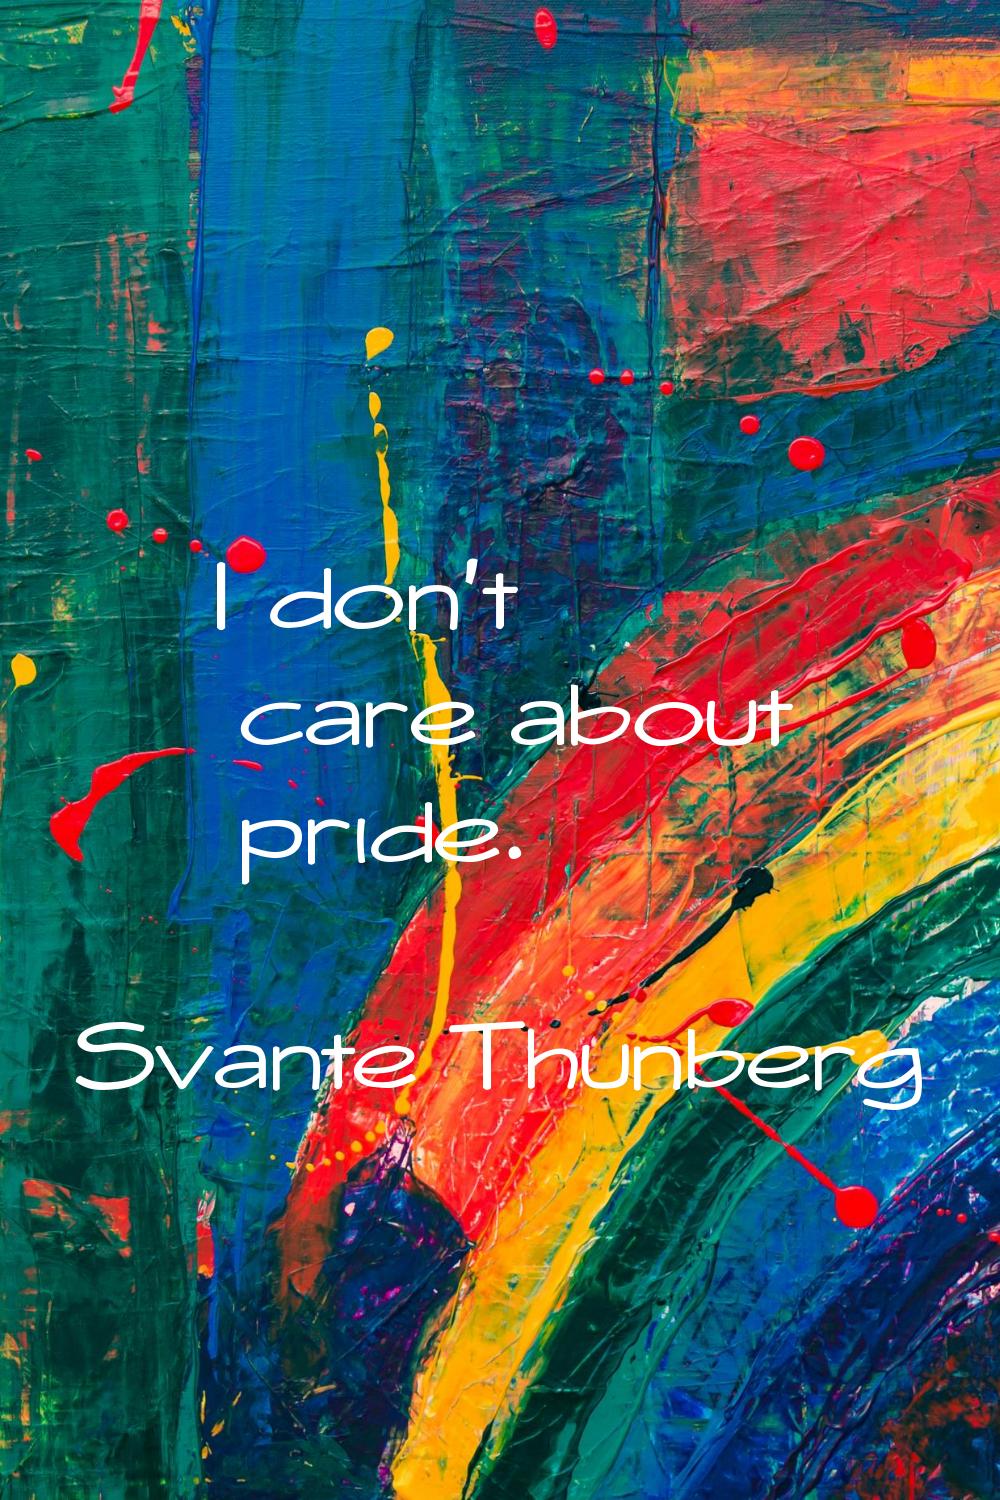 I don't care about pride.